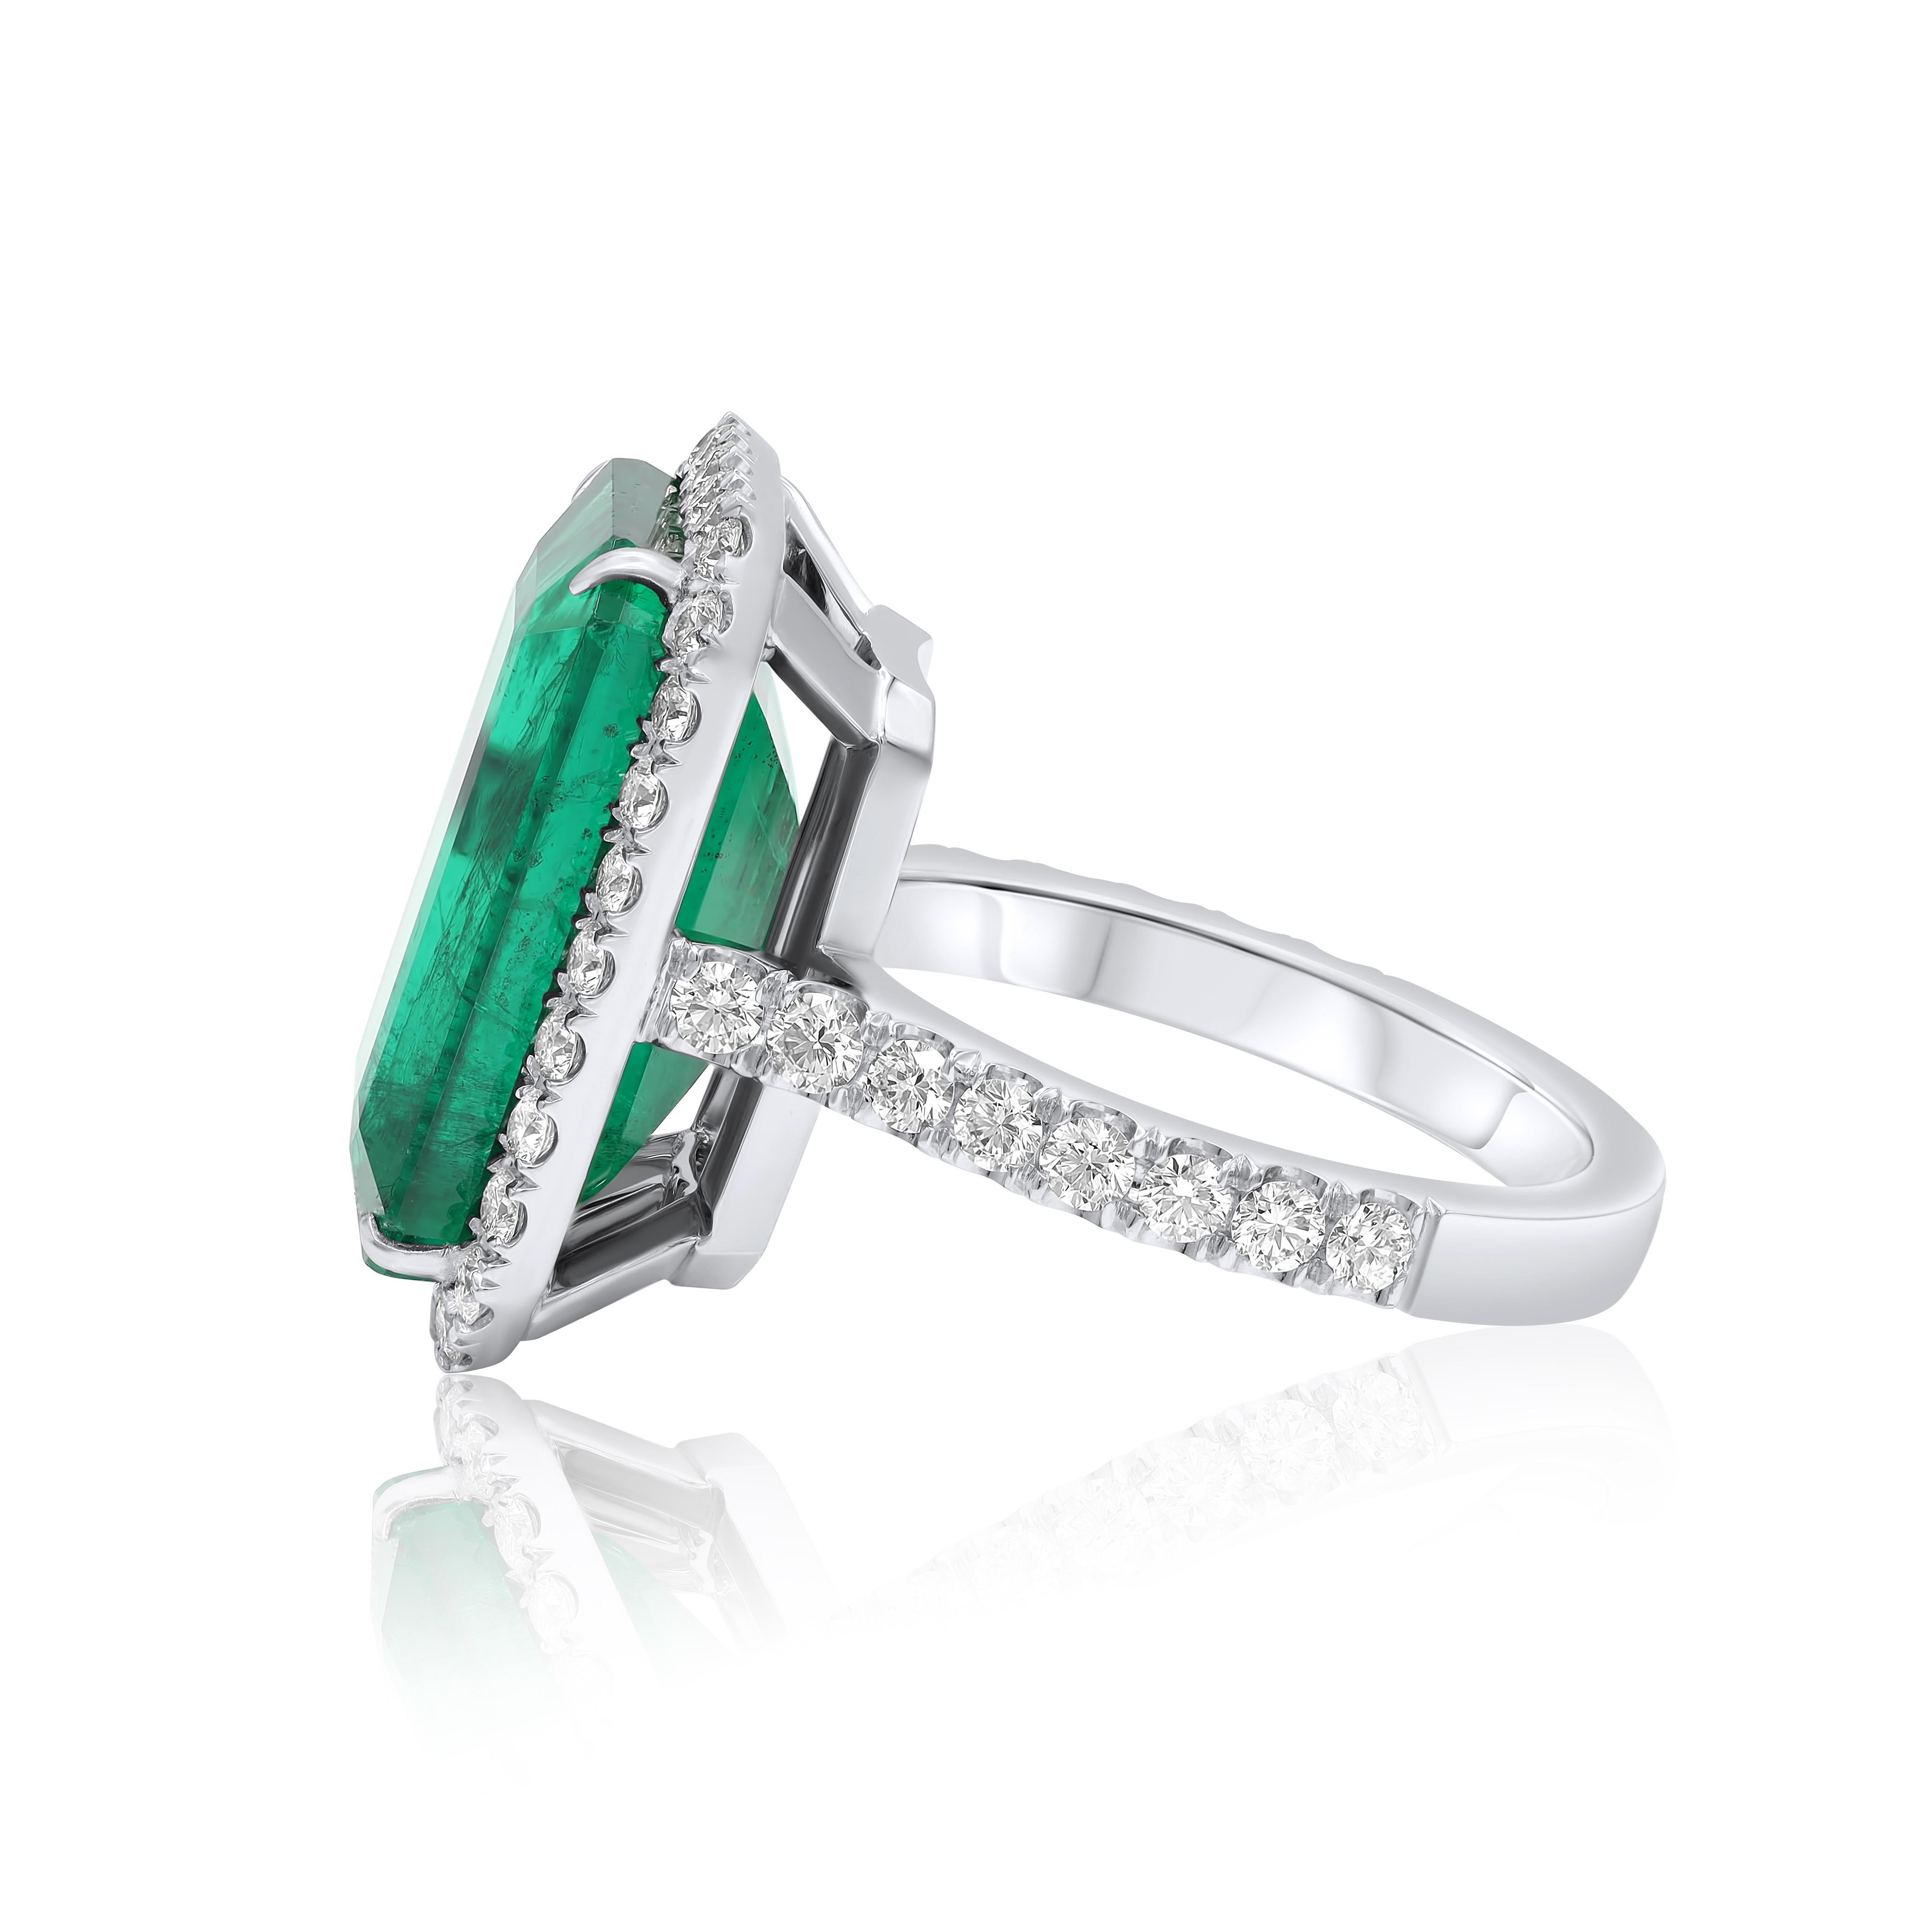 Platinum emerald diamond ring featuring a 10.07 ct natural emerald with 1.05 cts tw of micropave round diamonds.
Diana M. is a leading supplier of top-quality fine jewelry for over 35 years.
Diana M is one-stop shop for all your jewelry shopping,